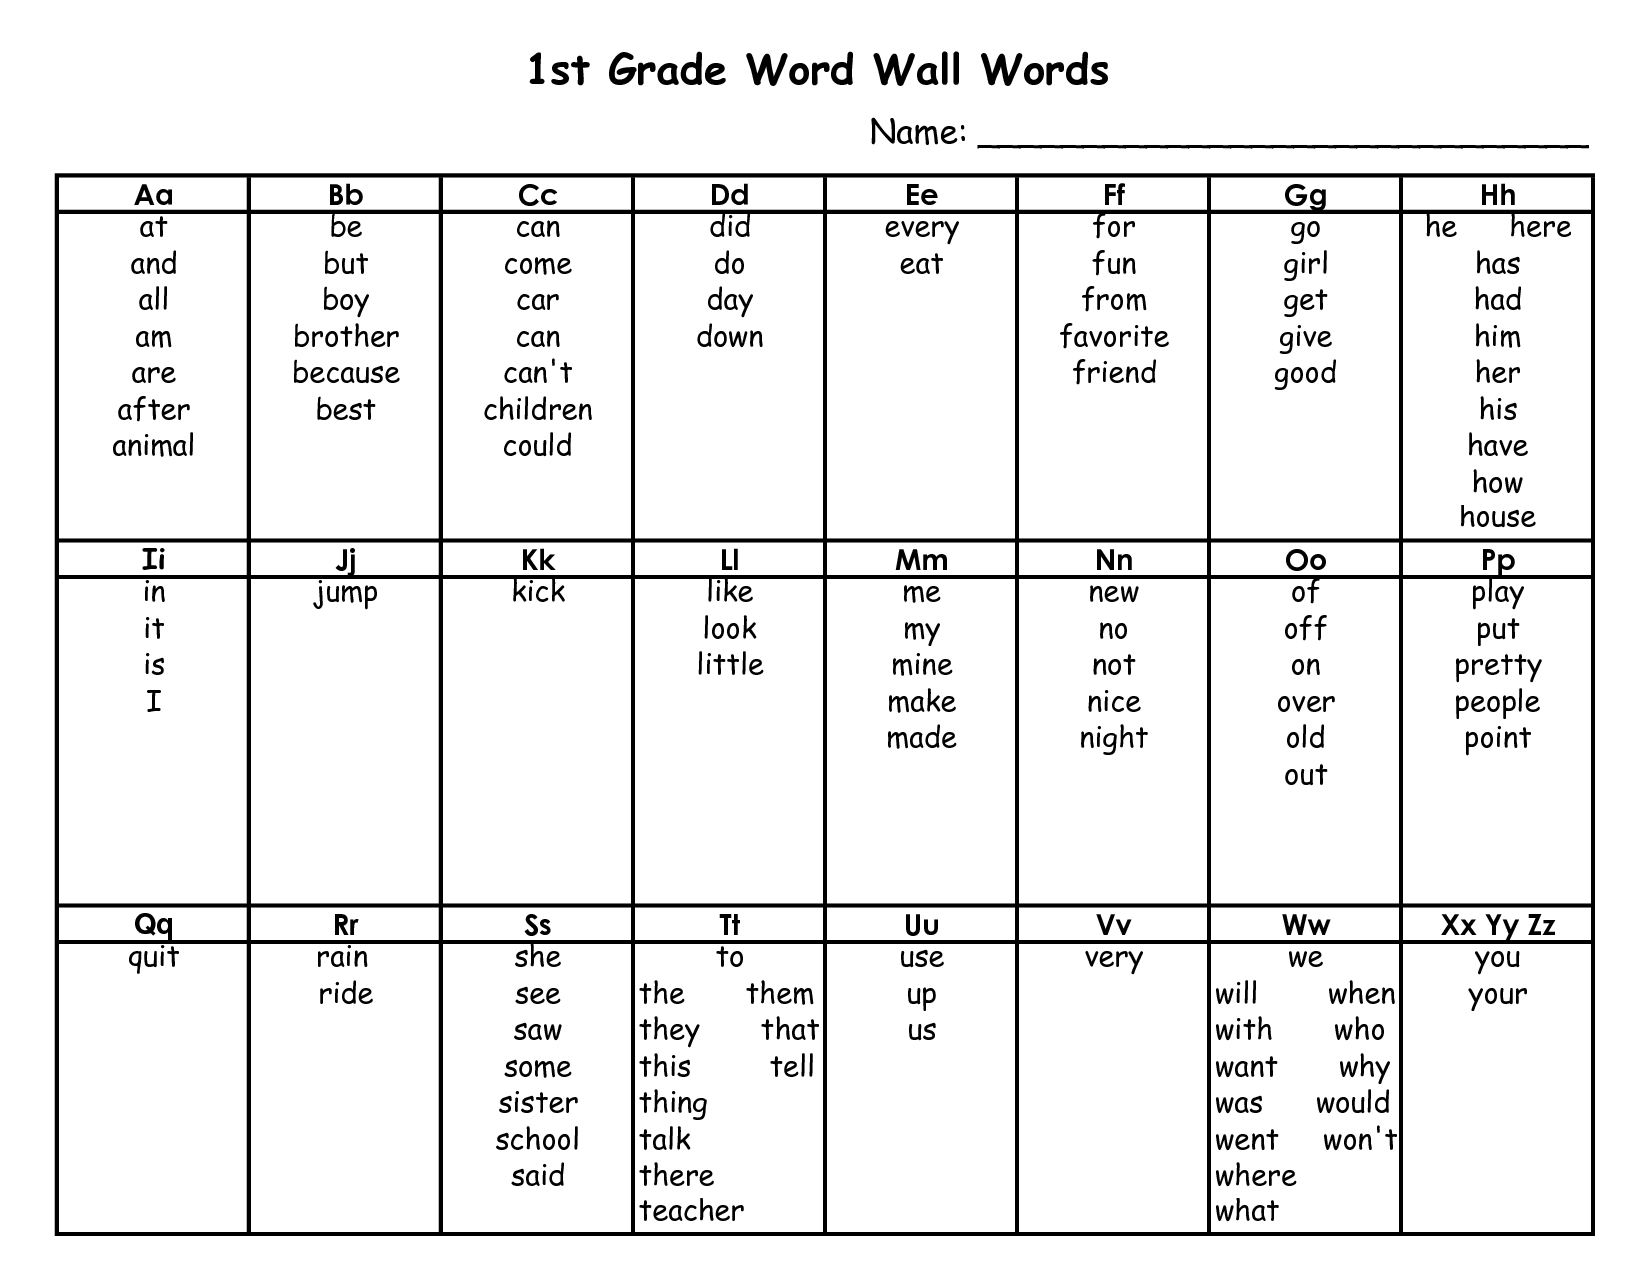 Personal Word Wall Template | First Grade Words, Sight Word Pertaining To Personal Word Wall Template